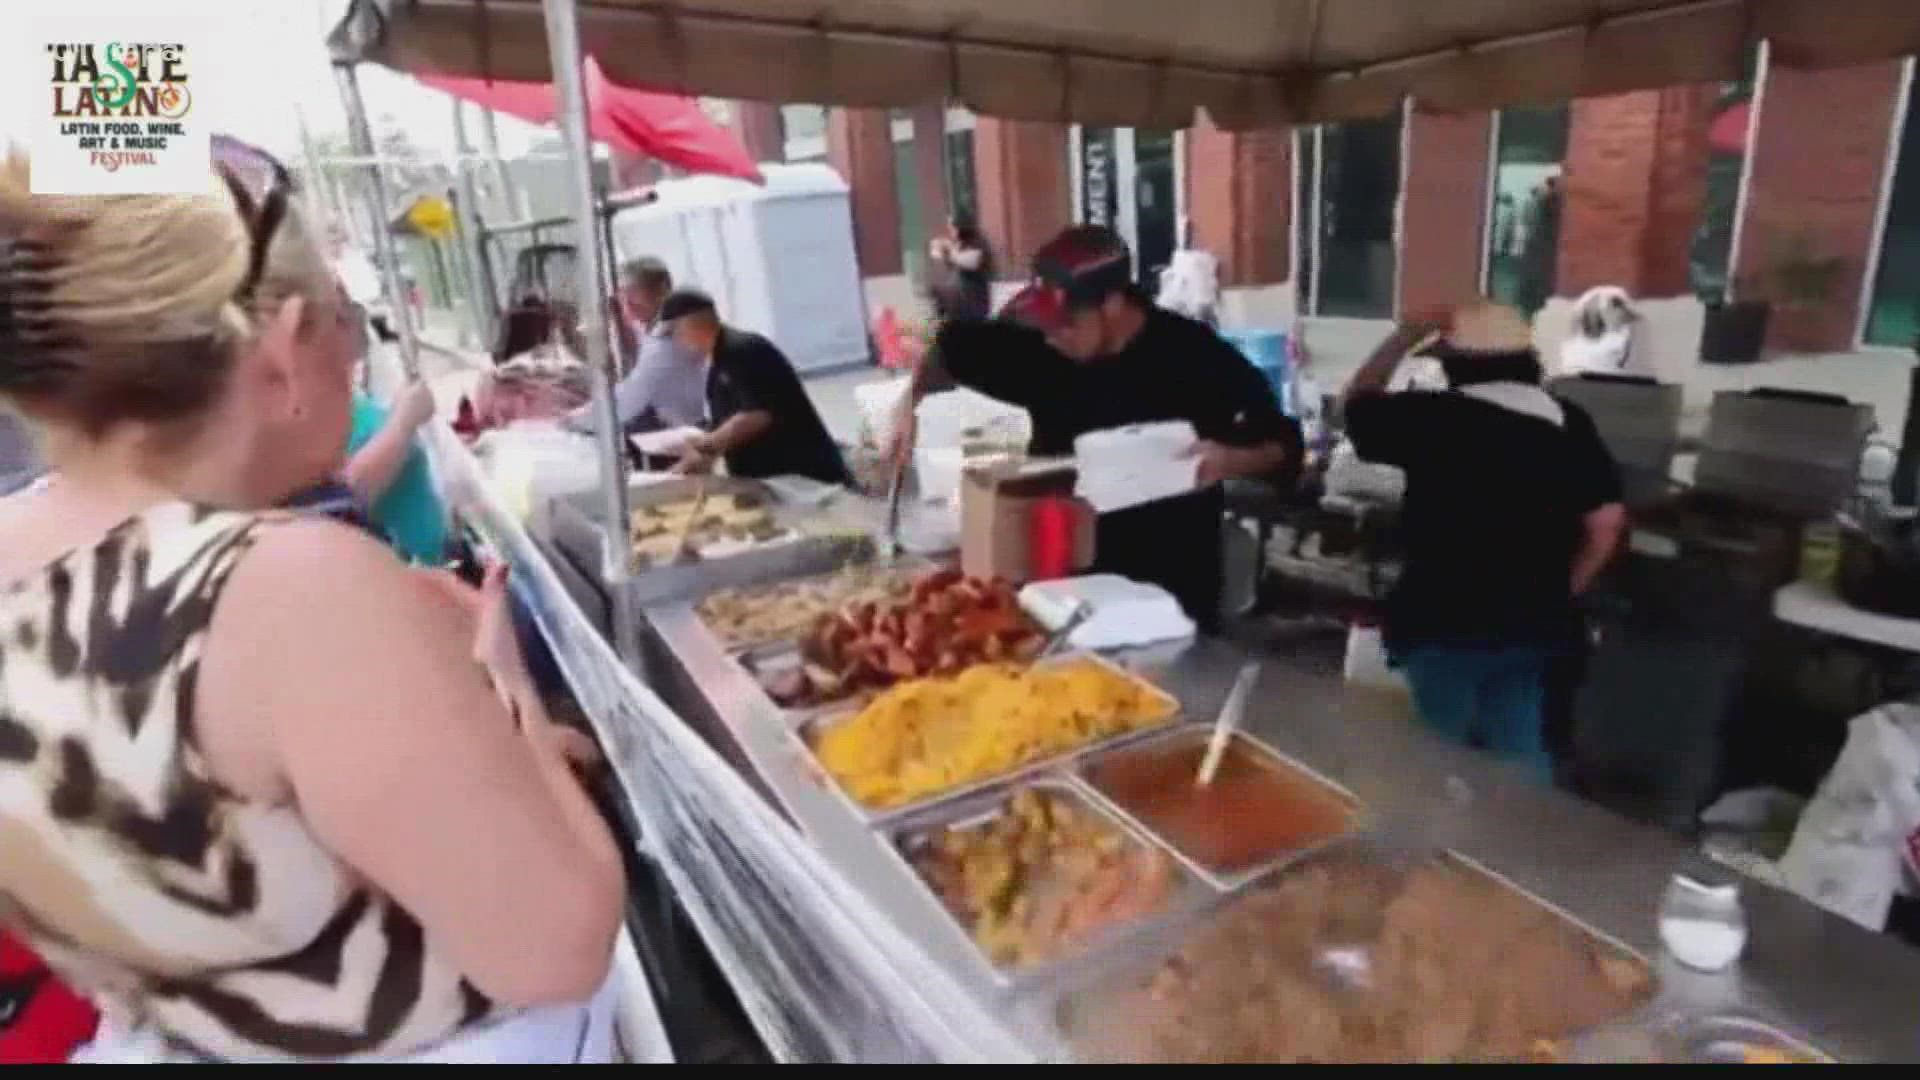 Good food and good music will draw in thousands on Sunday for the 3rd Annual Taste of Latino Festival.